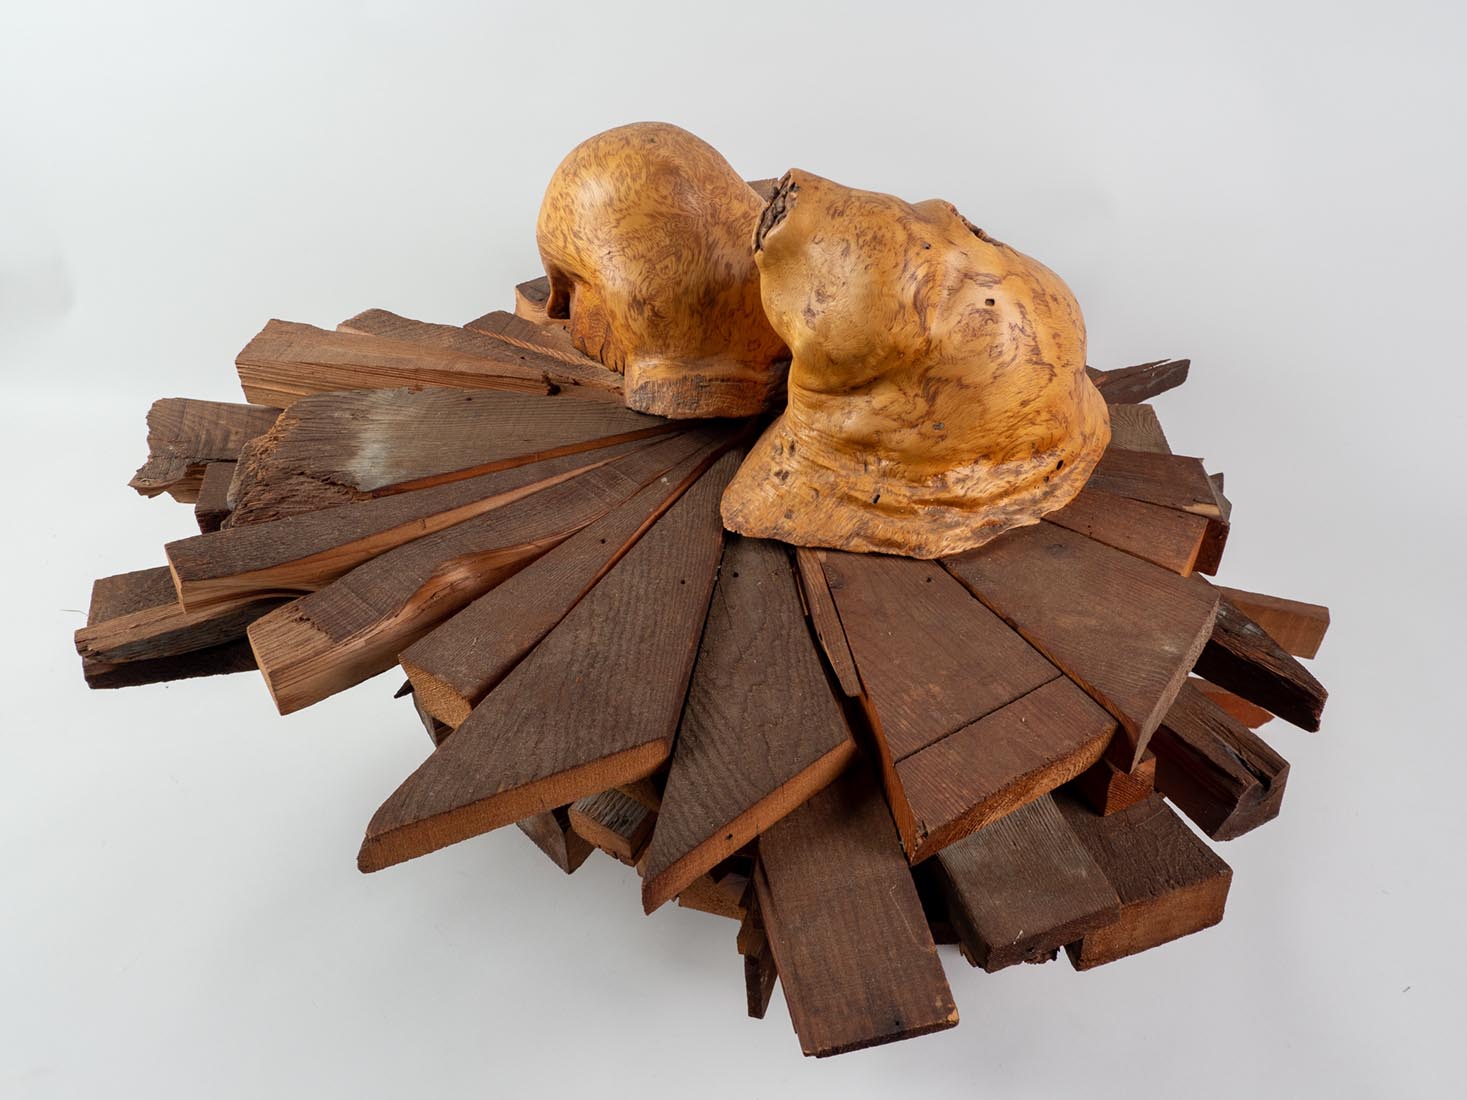 Wood assemblage with burls - wood sculpture by Marjorie White Williams